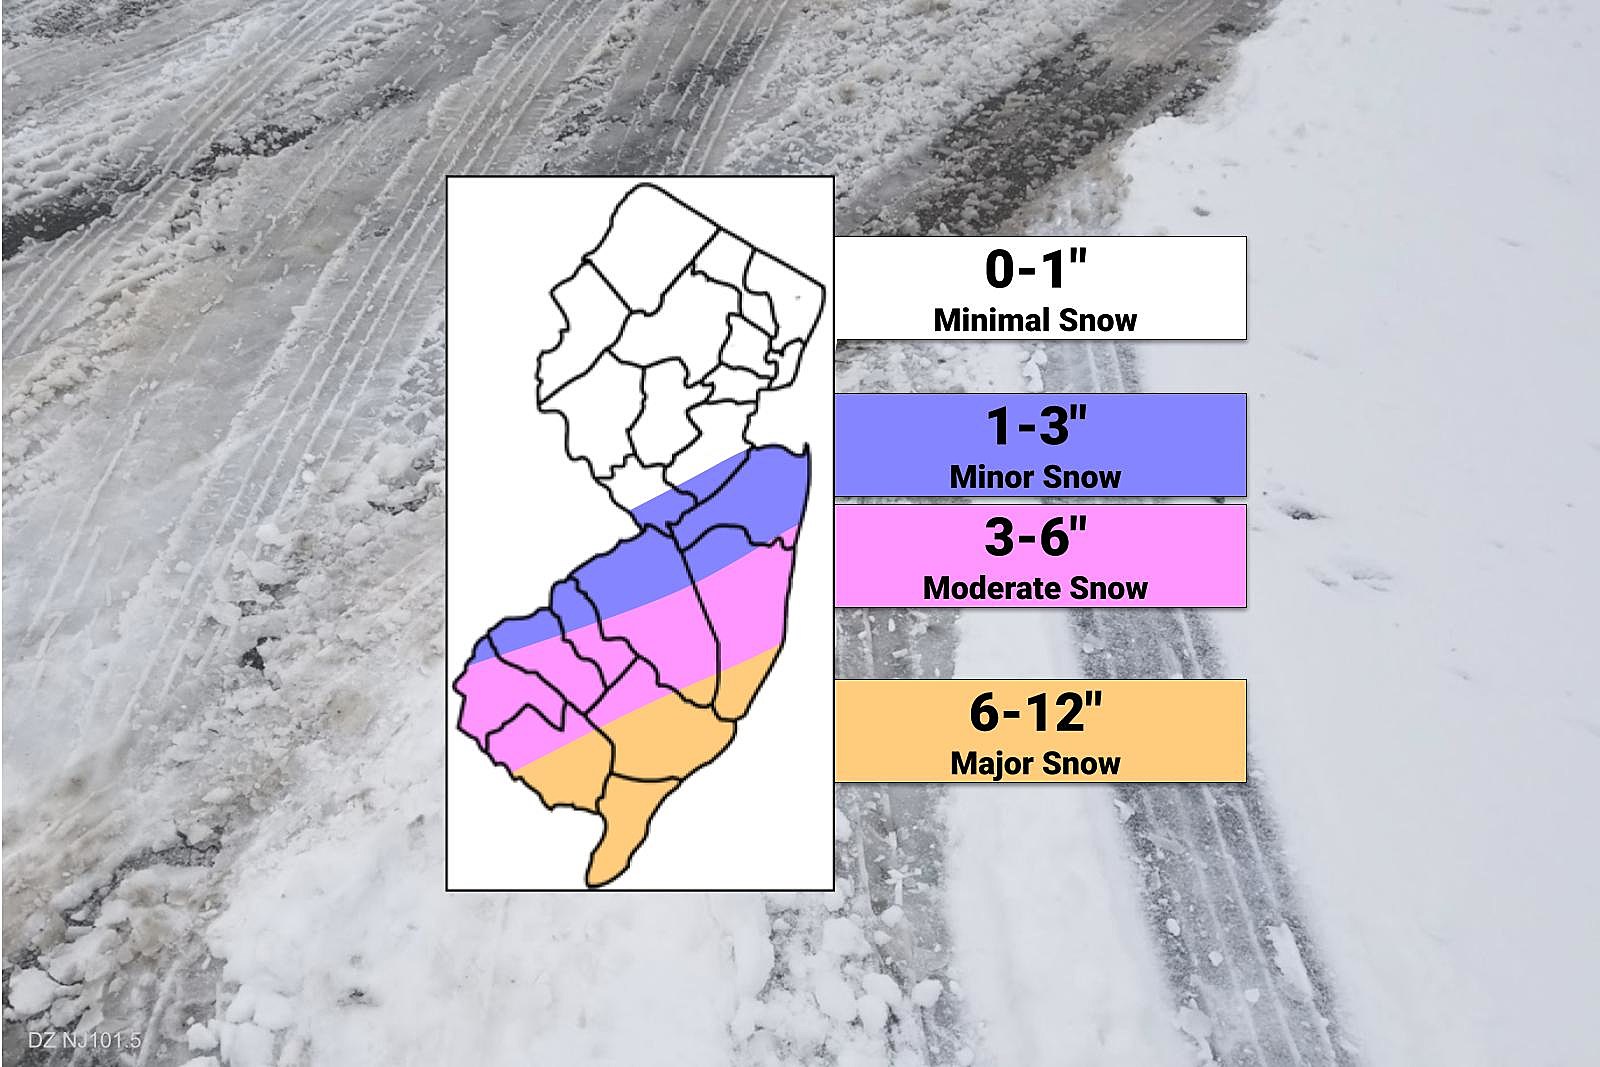 Monday AM NJ winter storm update 612" snow south, nothing north